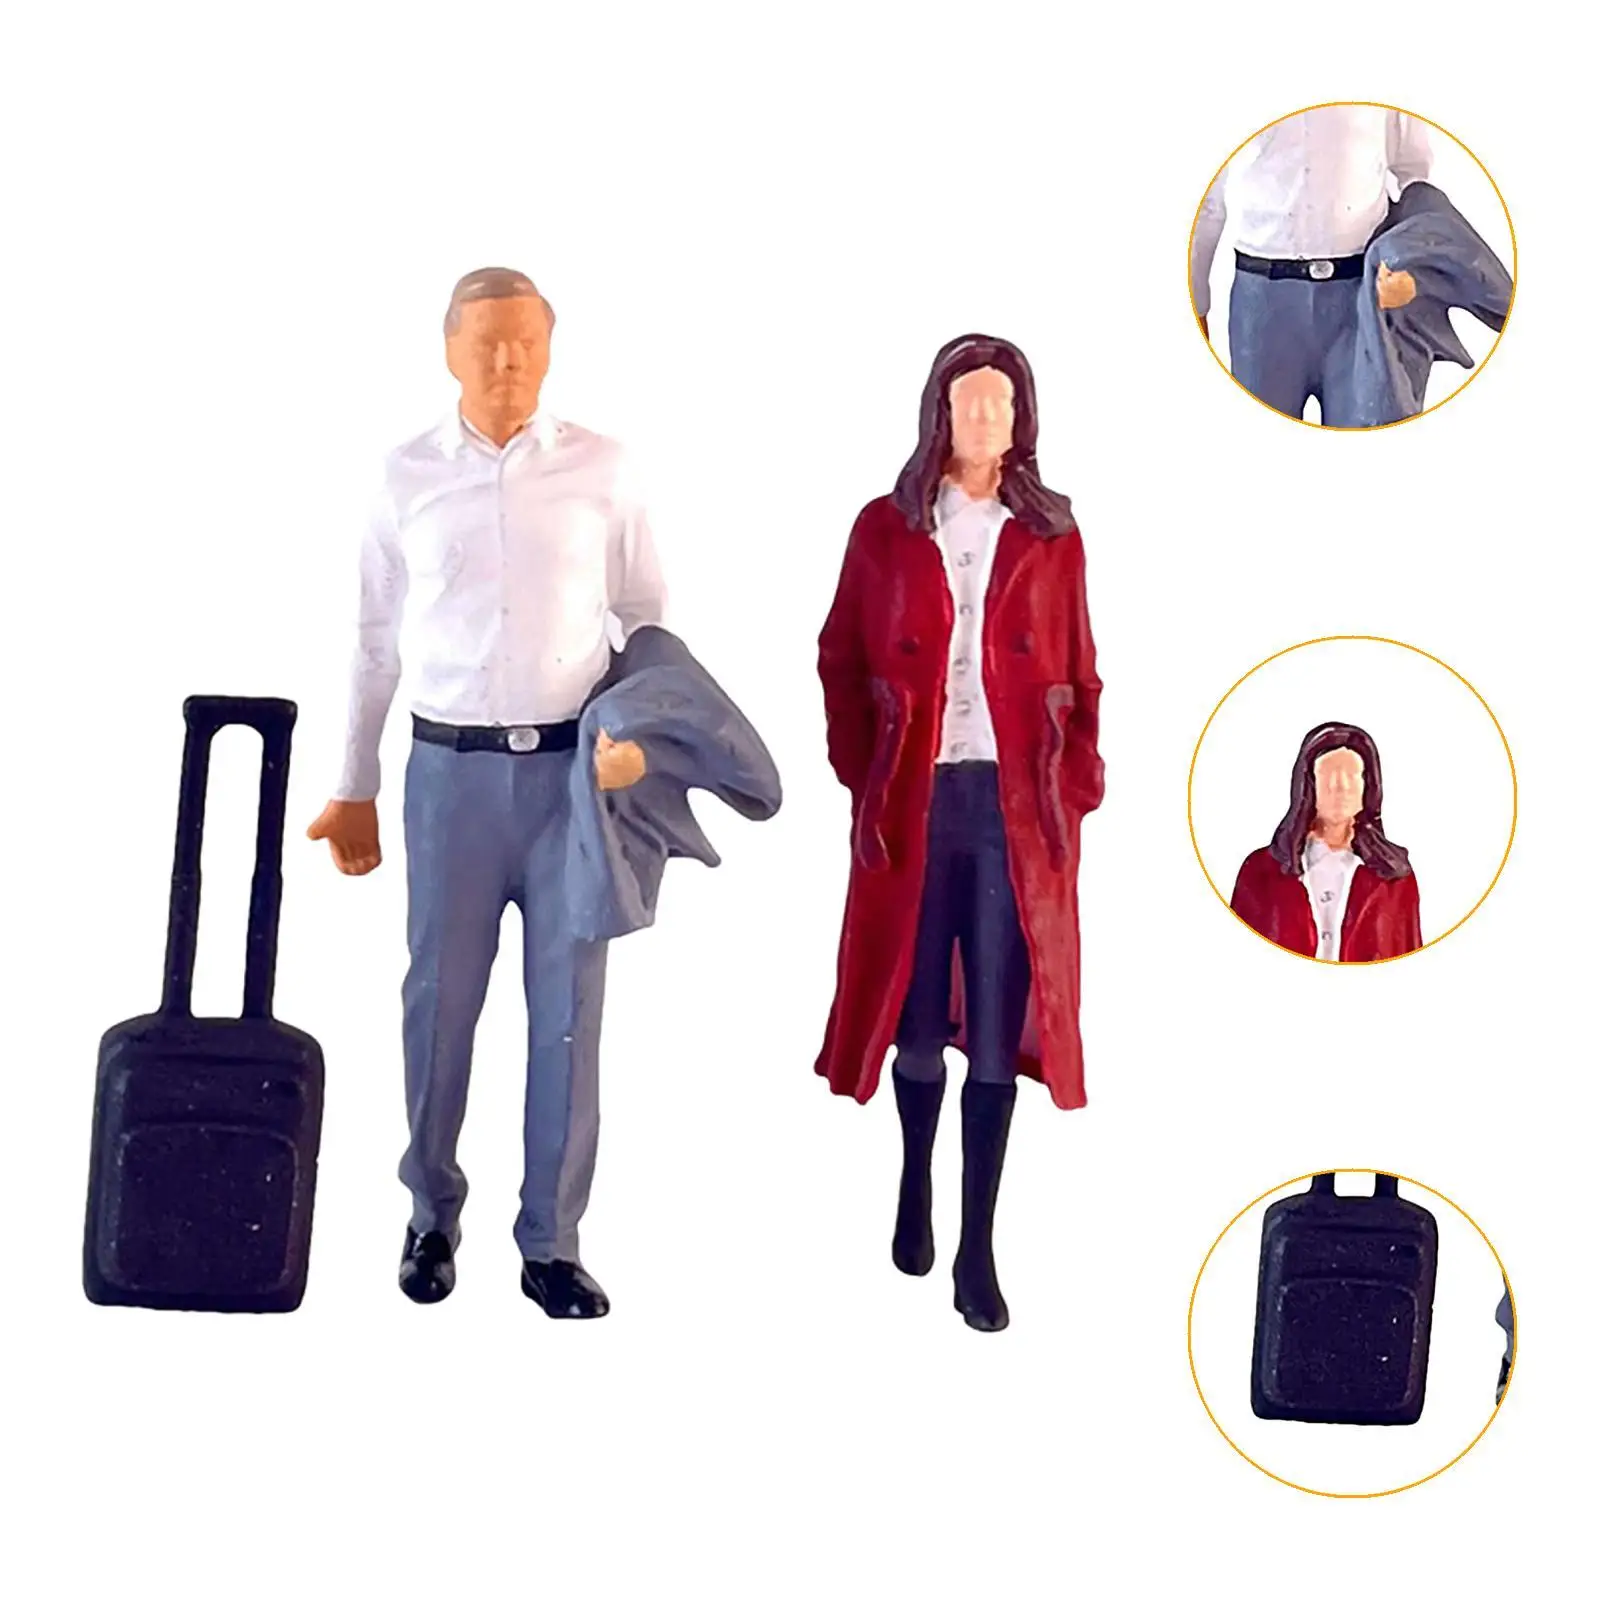 2Pcs 1:64 Scale Women and Men Figures with Suitcase Model S Gauge Collections Layout Decoration Resin Figurines Decoration